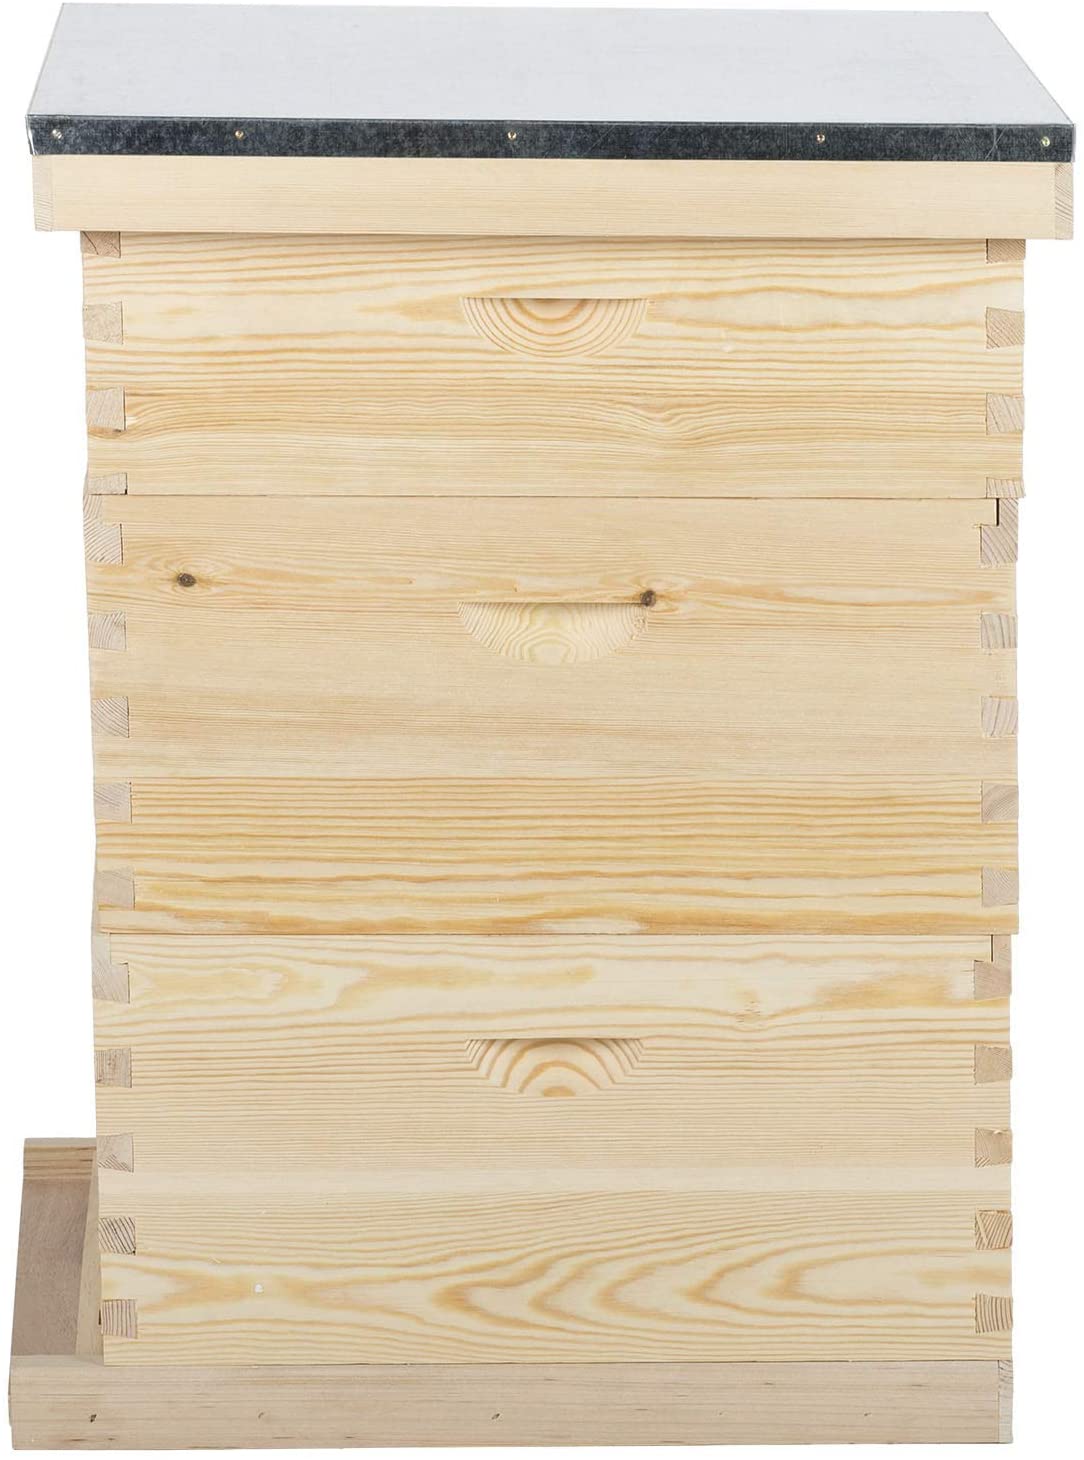 Bee Hive with frames